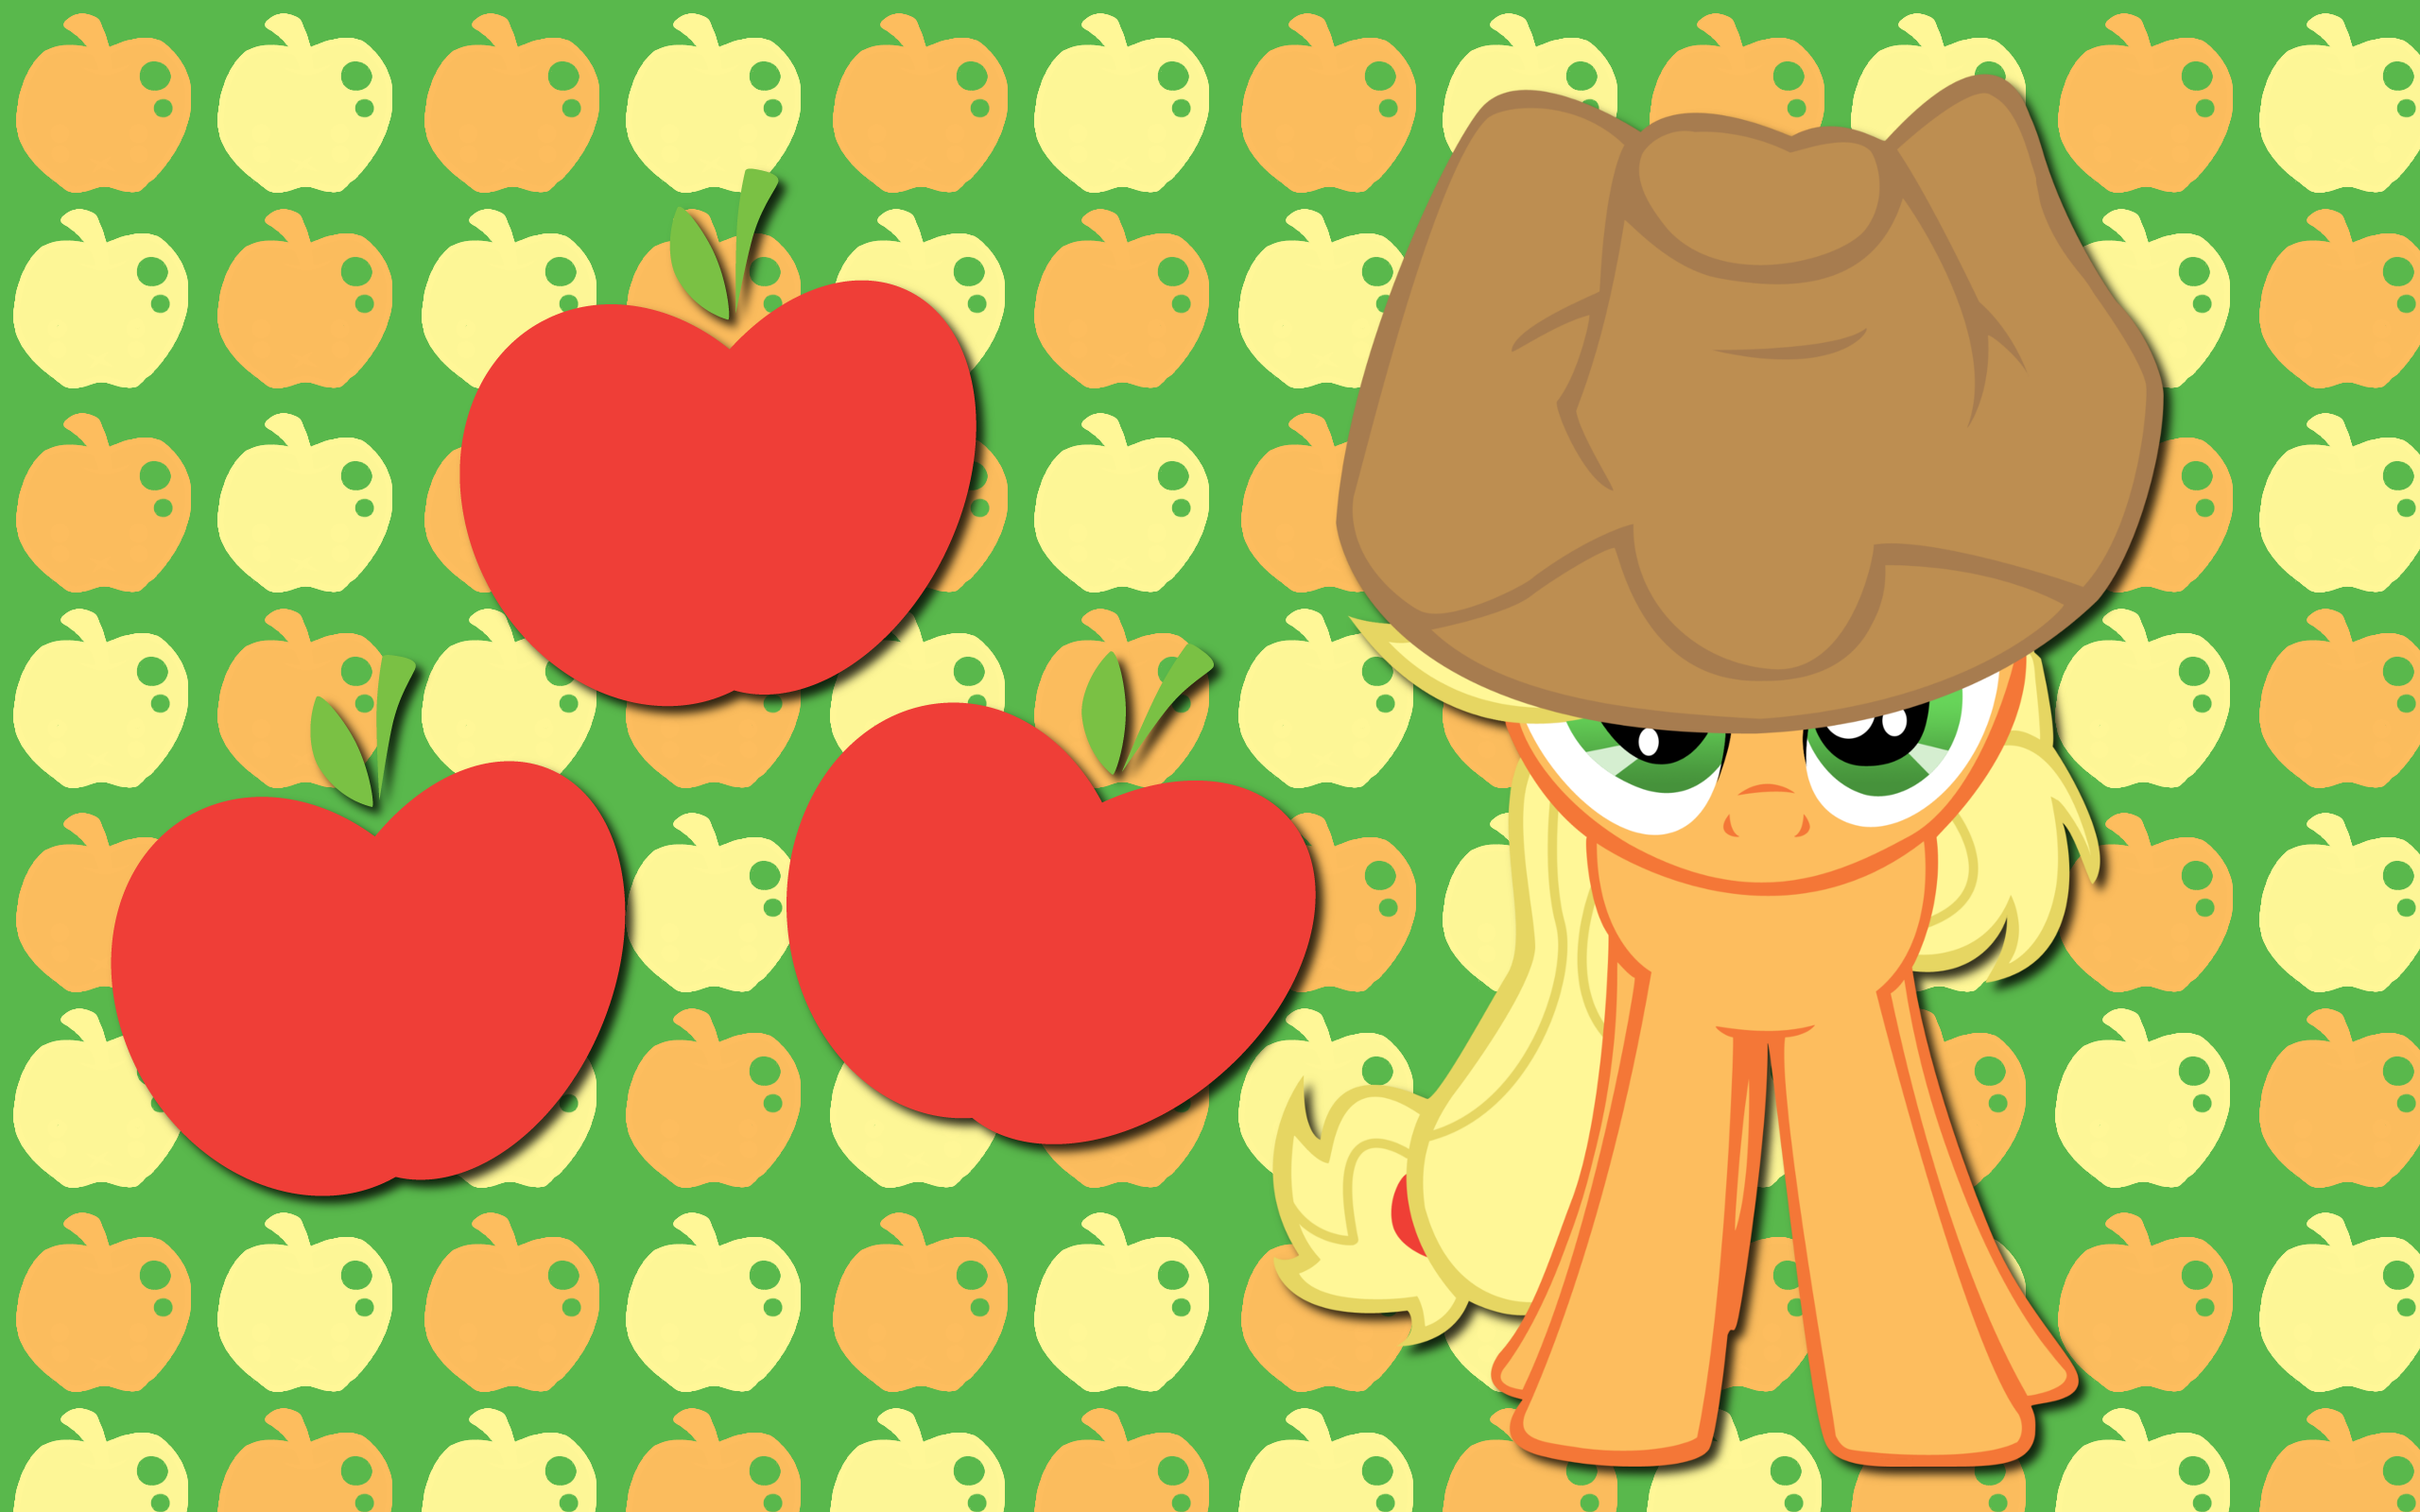 Apple Jack WP 12 by AliceHumanSacrifice0, LcPsycho and ooklah